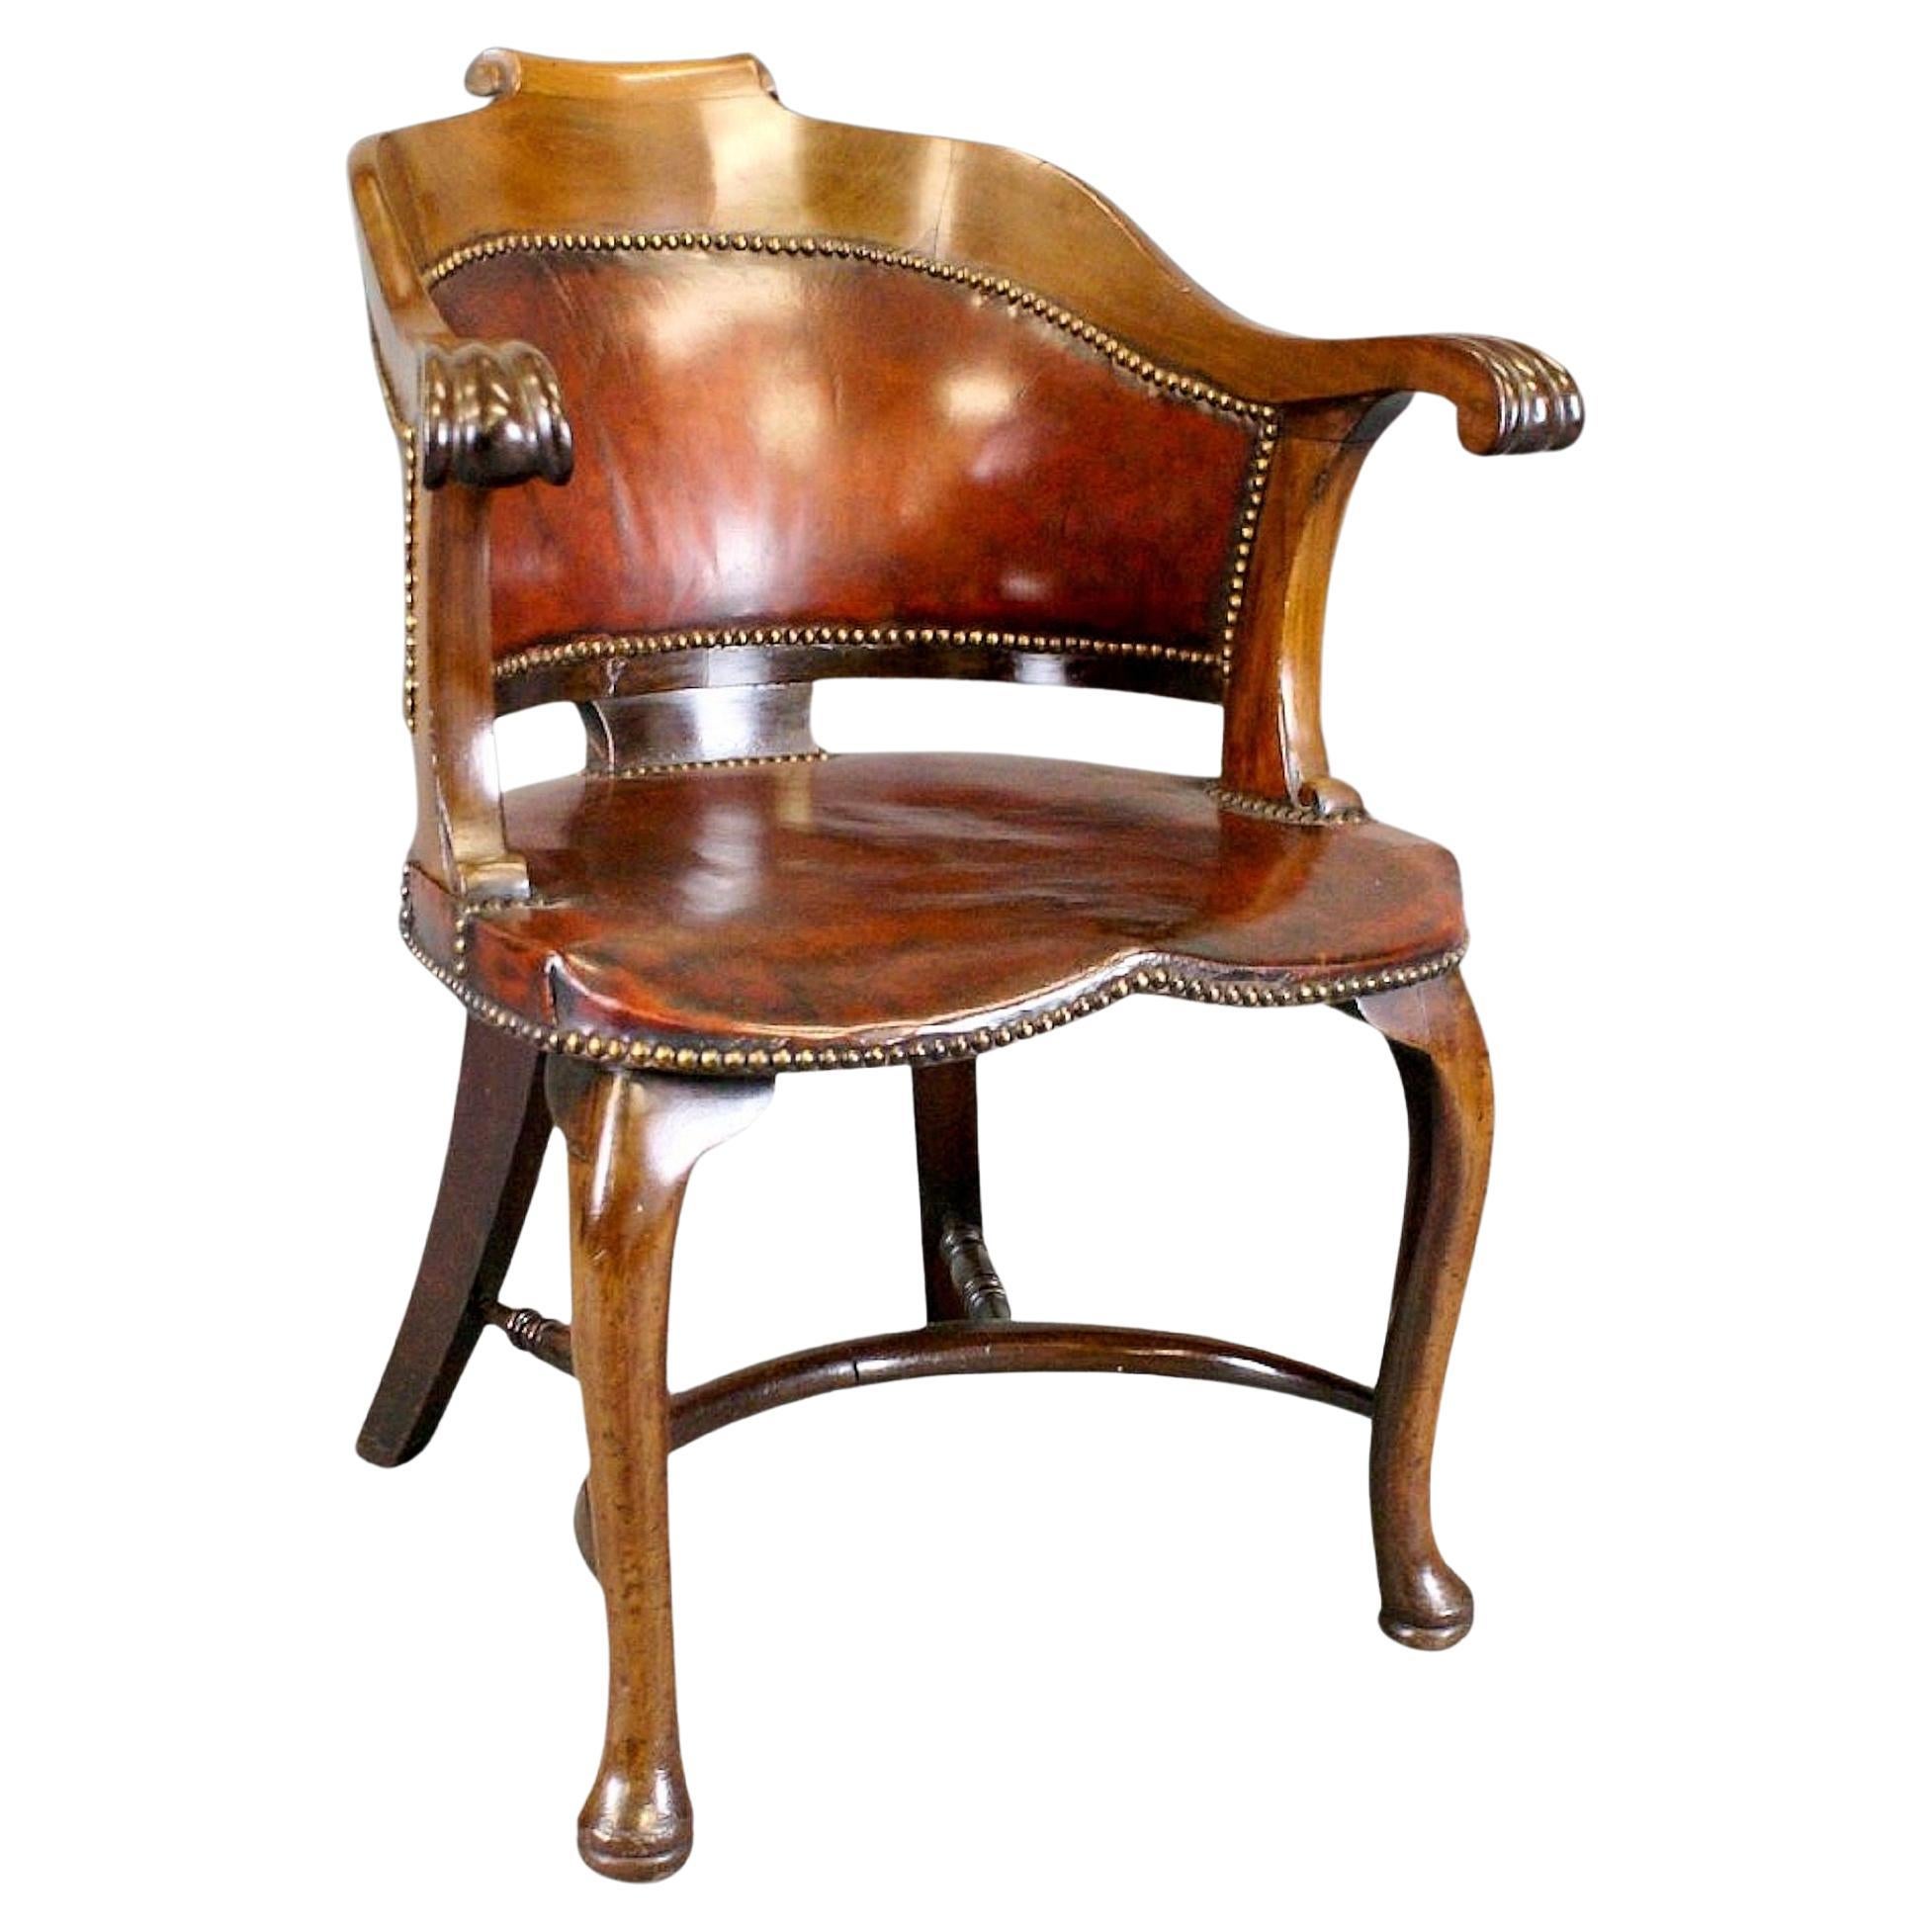 Turn of the Century English Leather and Walnut Armchair